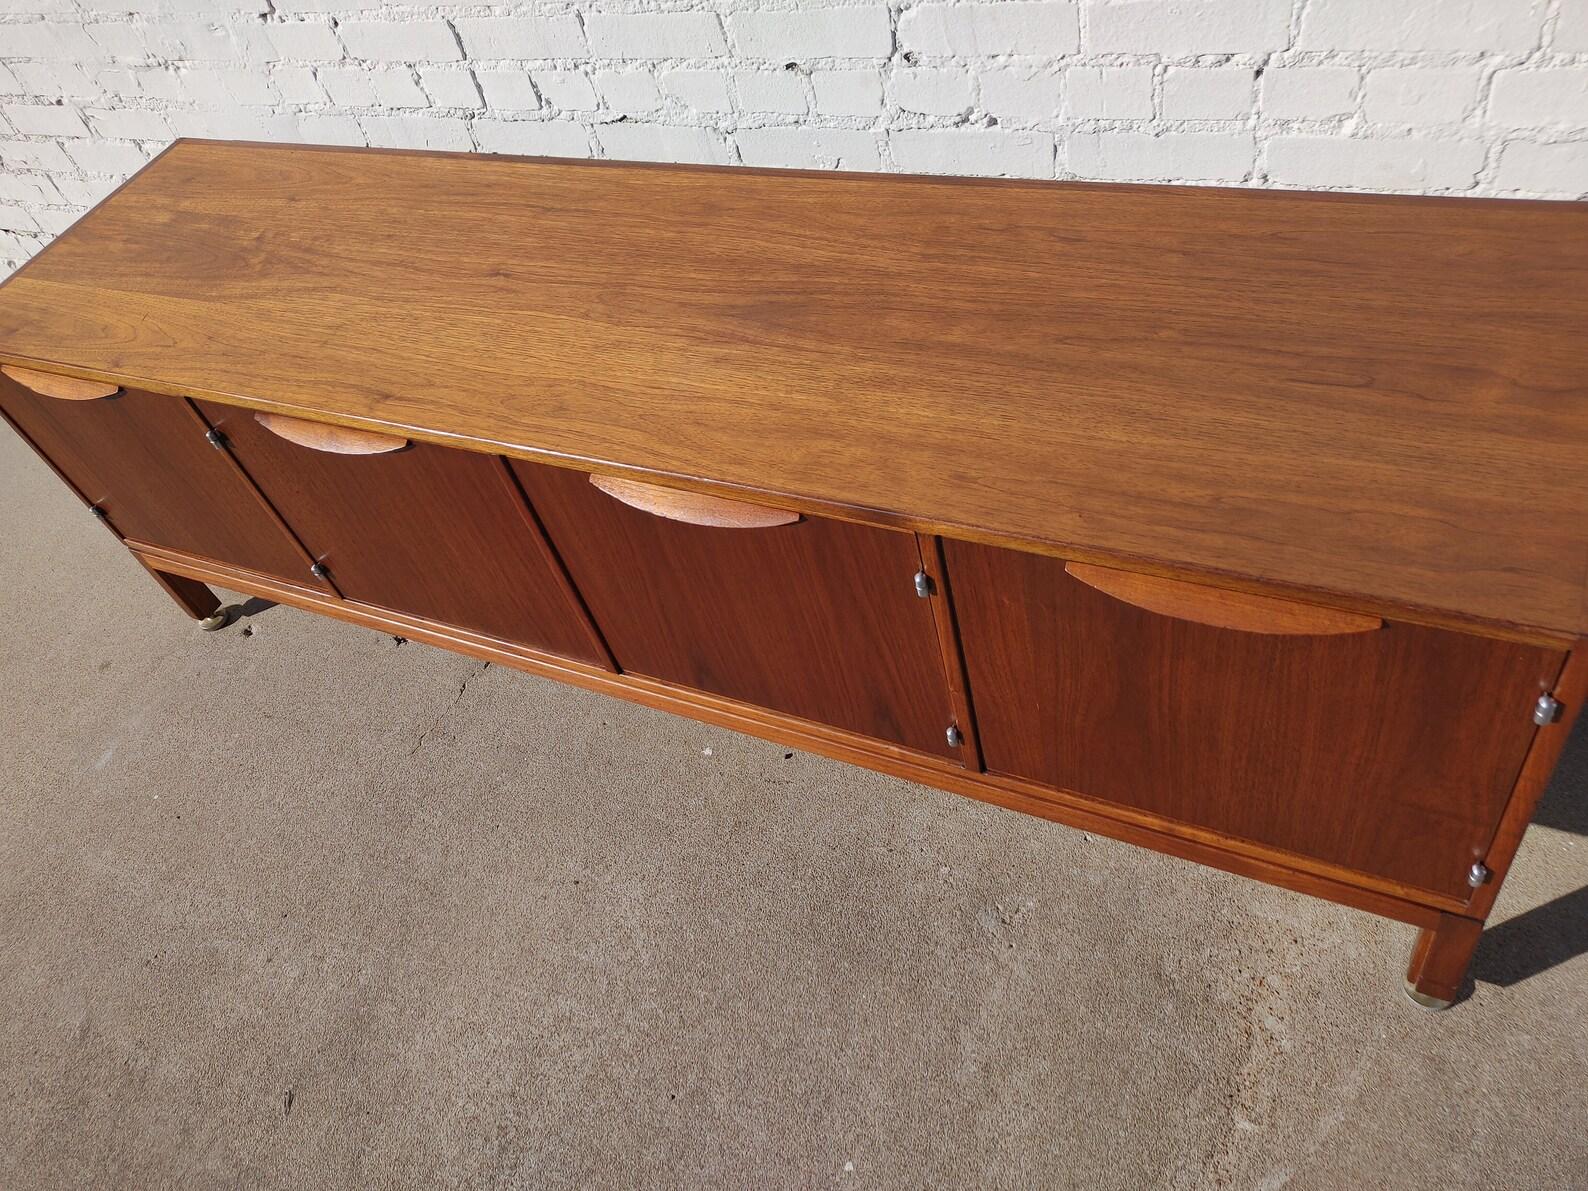 Mid Century Modern Jens Risom Walnut Credenza

Above average vintage condition and structurally sound. Has some expected slight finish wear and scratching. Edges and pulls have some dings/dents. Outdoor listing pictures might appear slightly darker